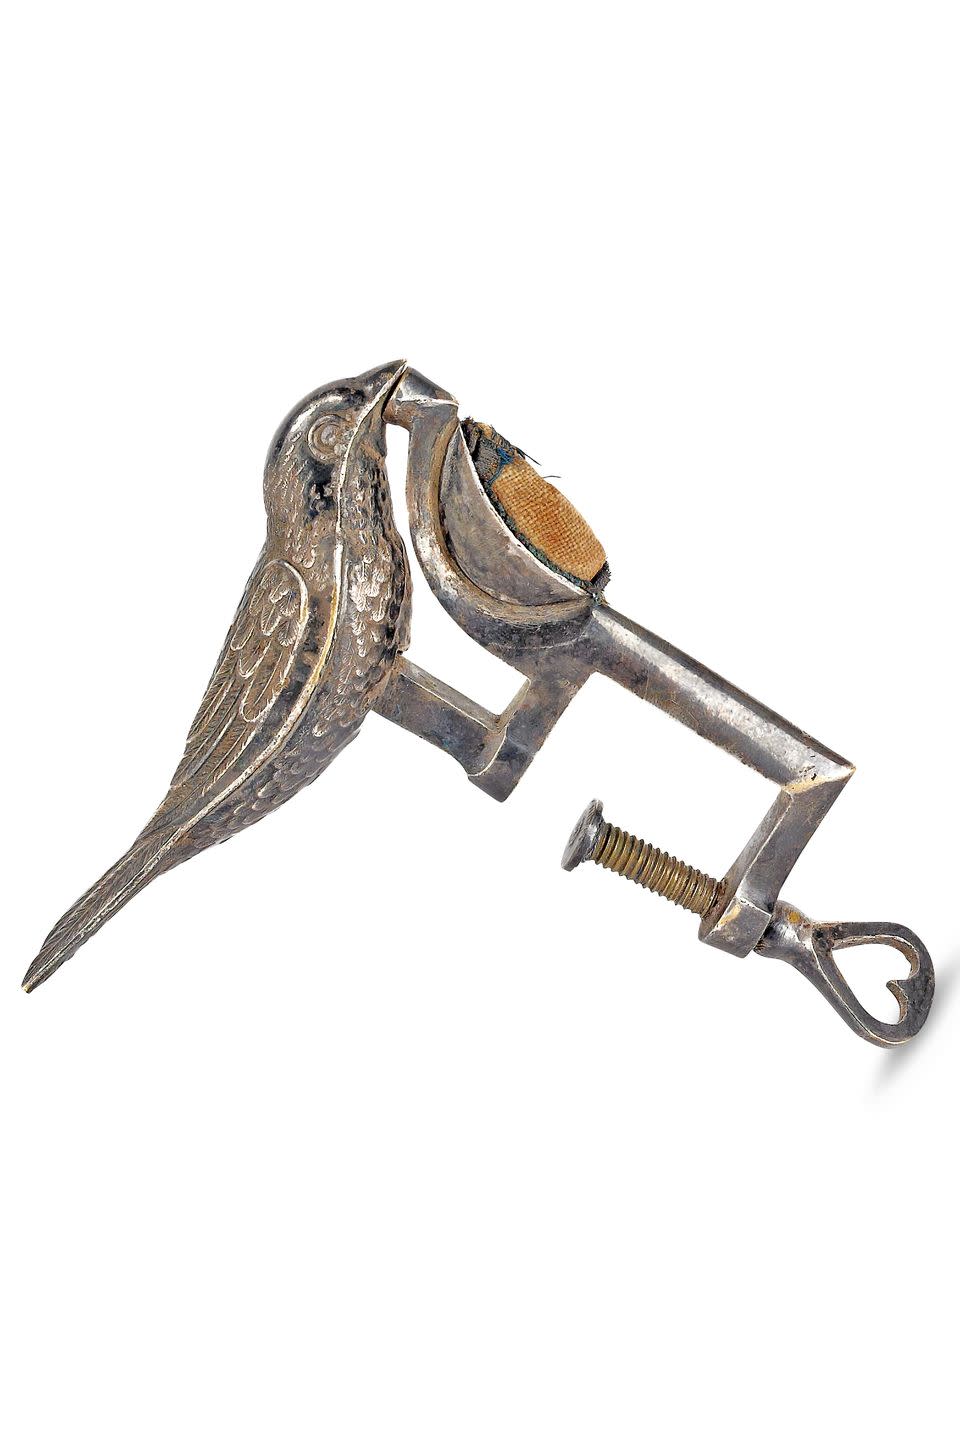 Early-20th-Century Sewing Bird Clamp